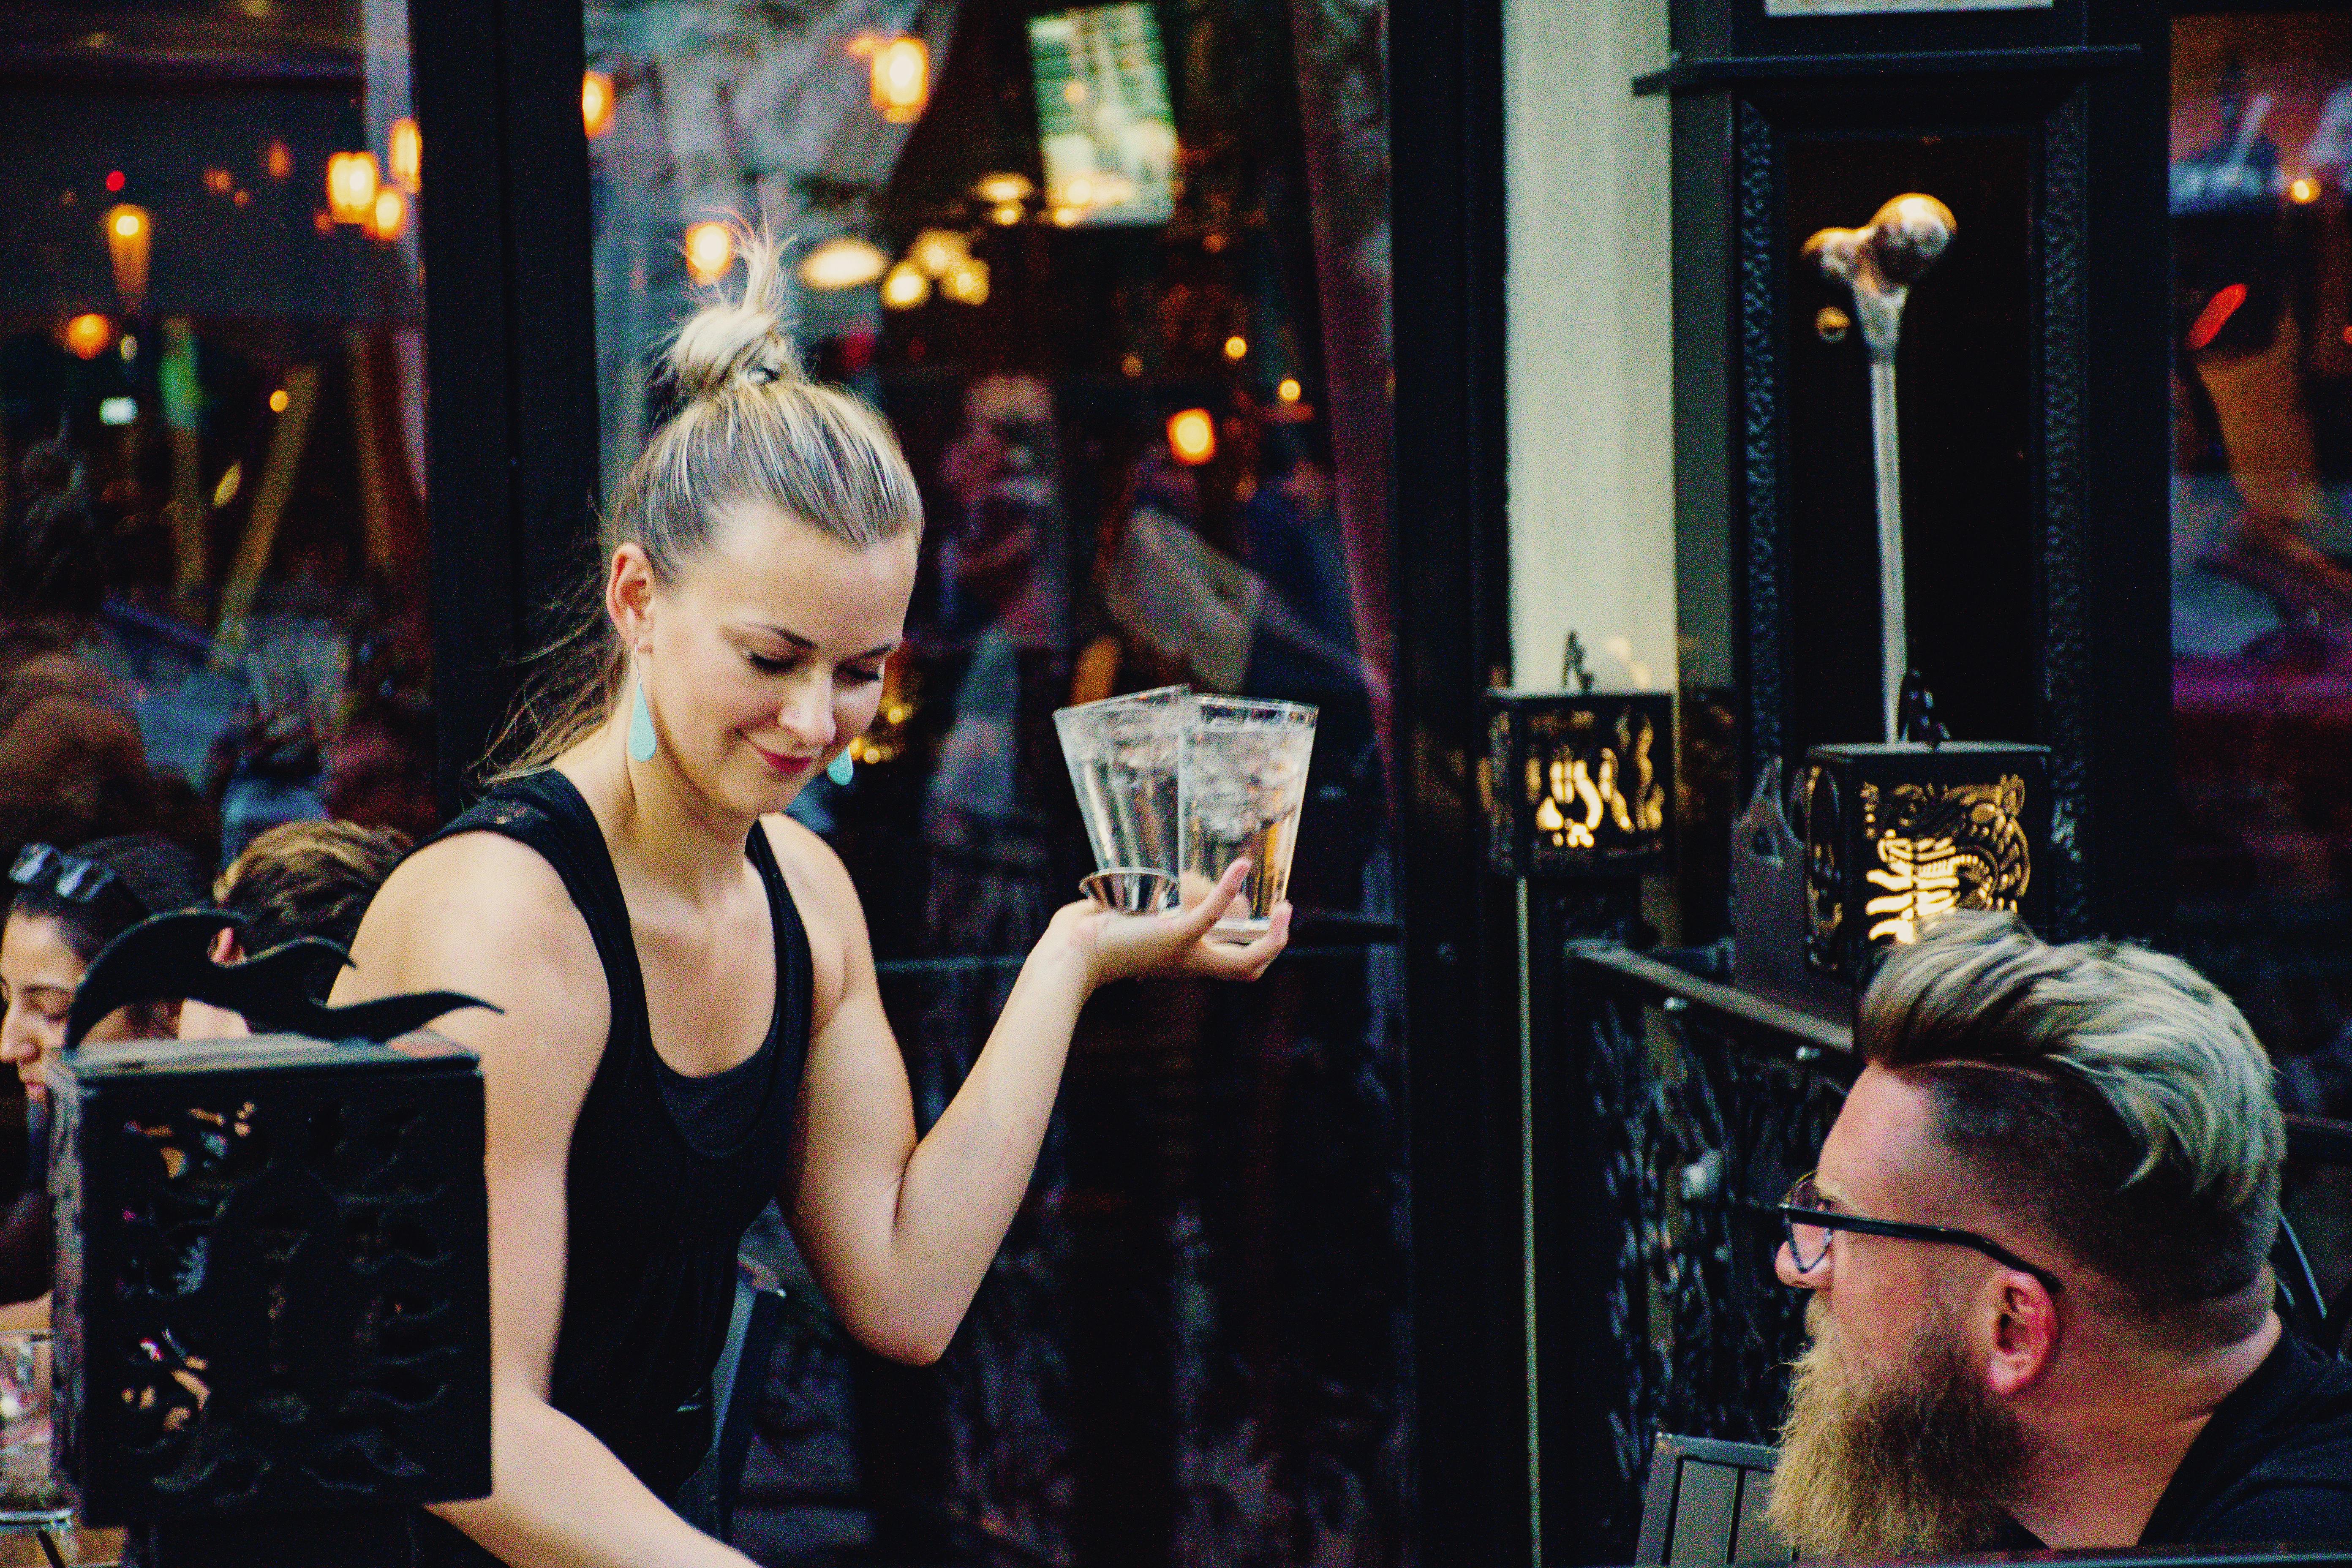 Woman Holding Higball Glass in Front of Man